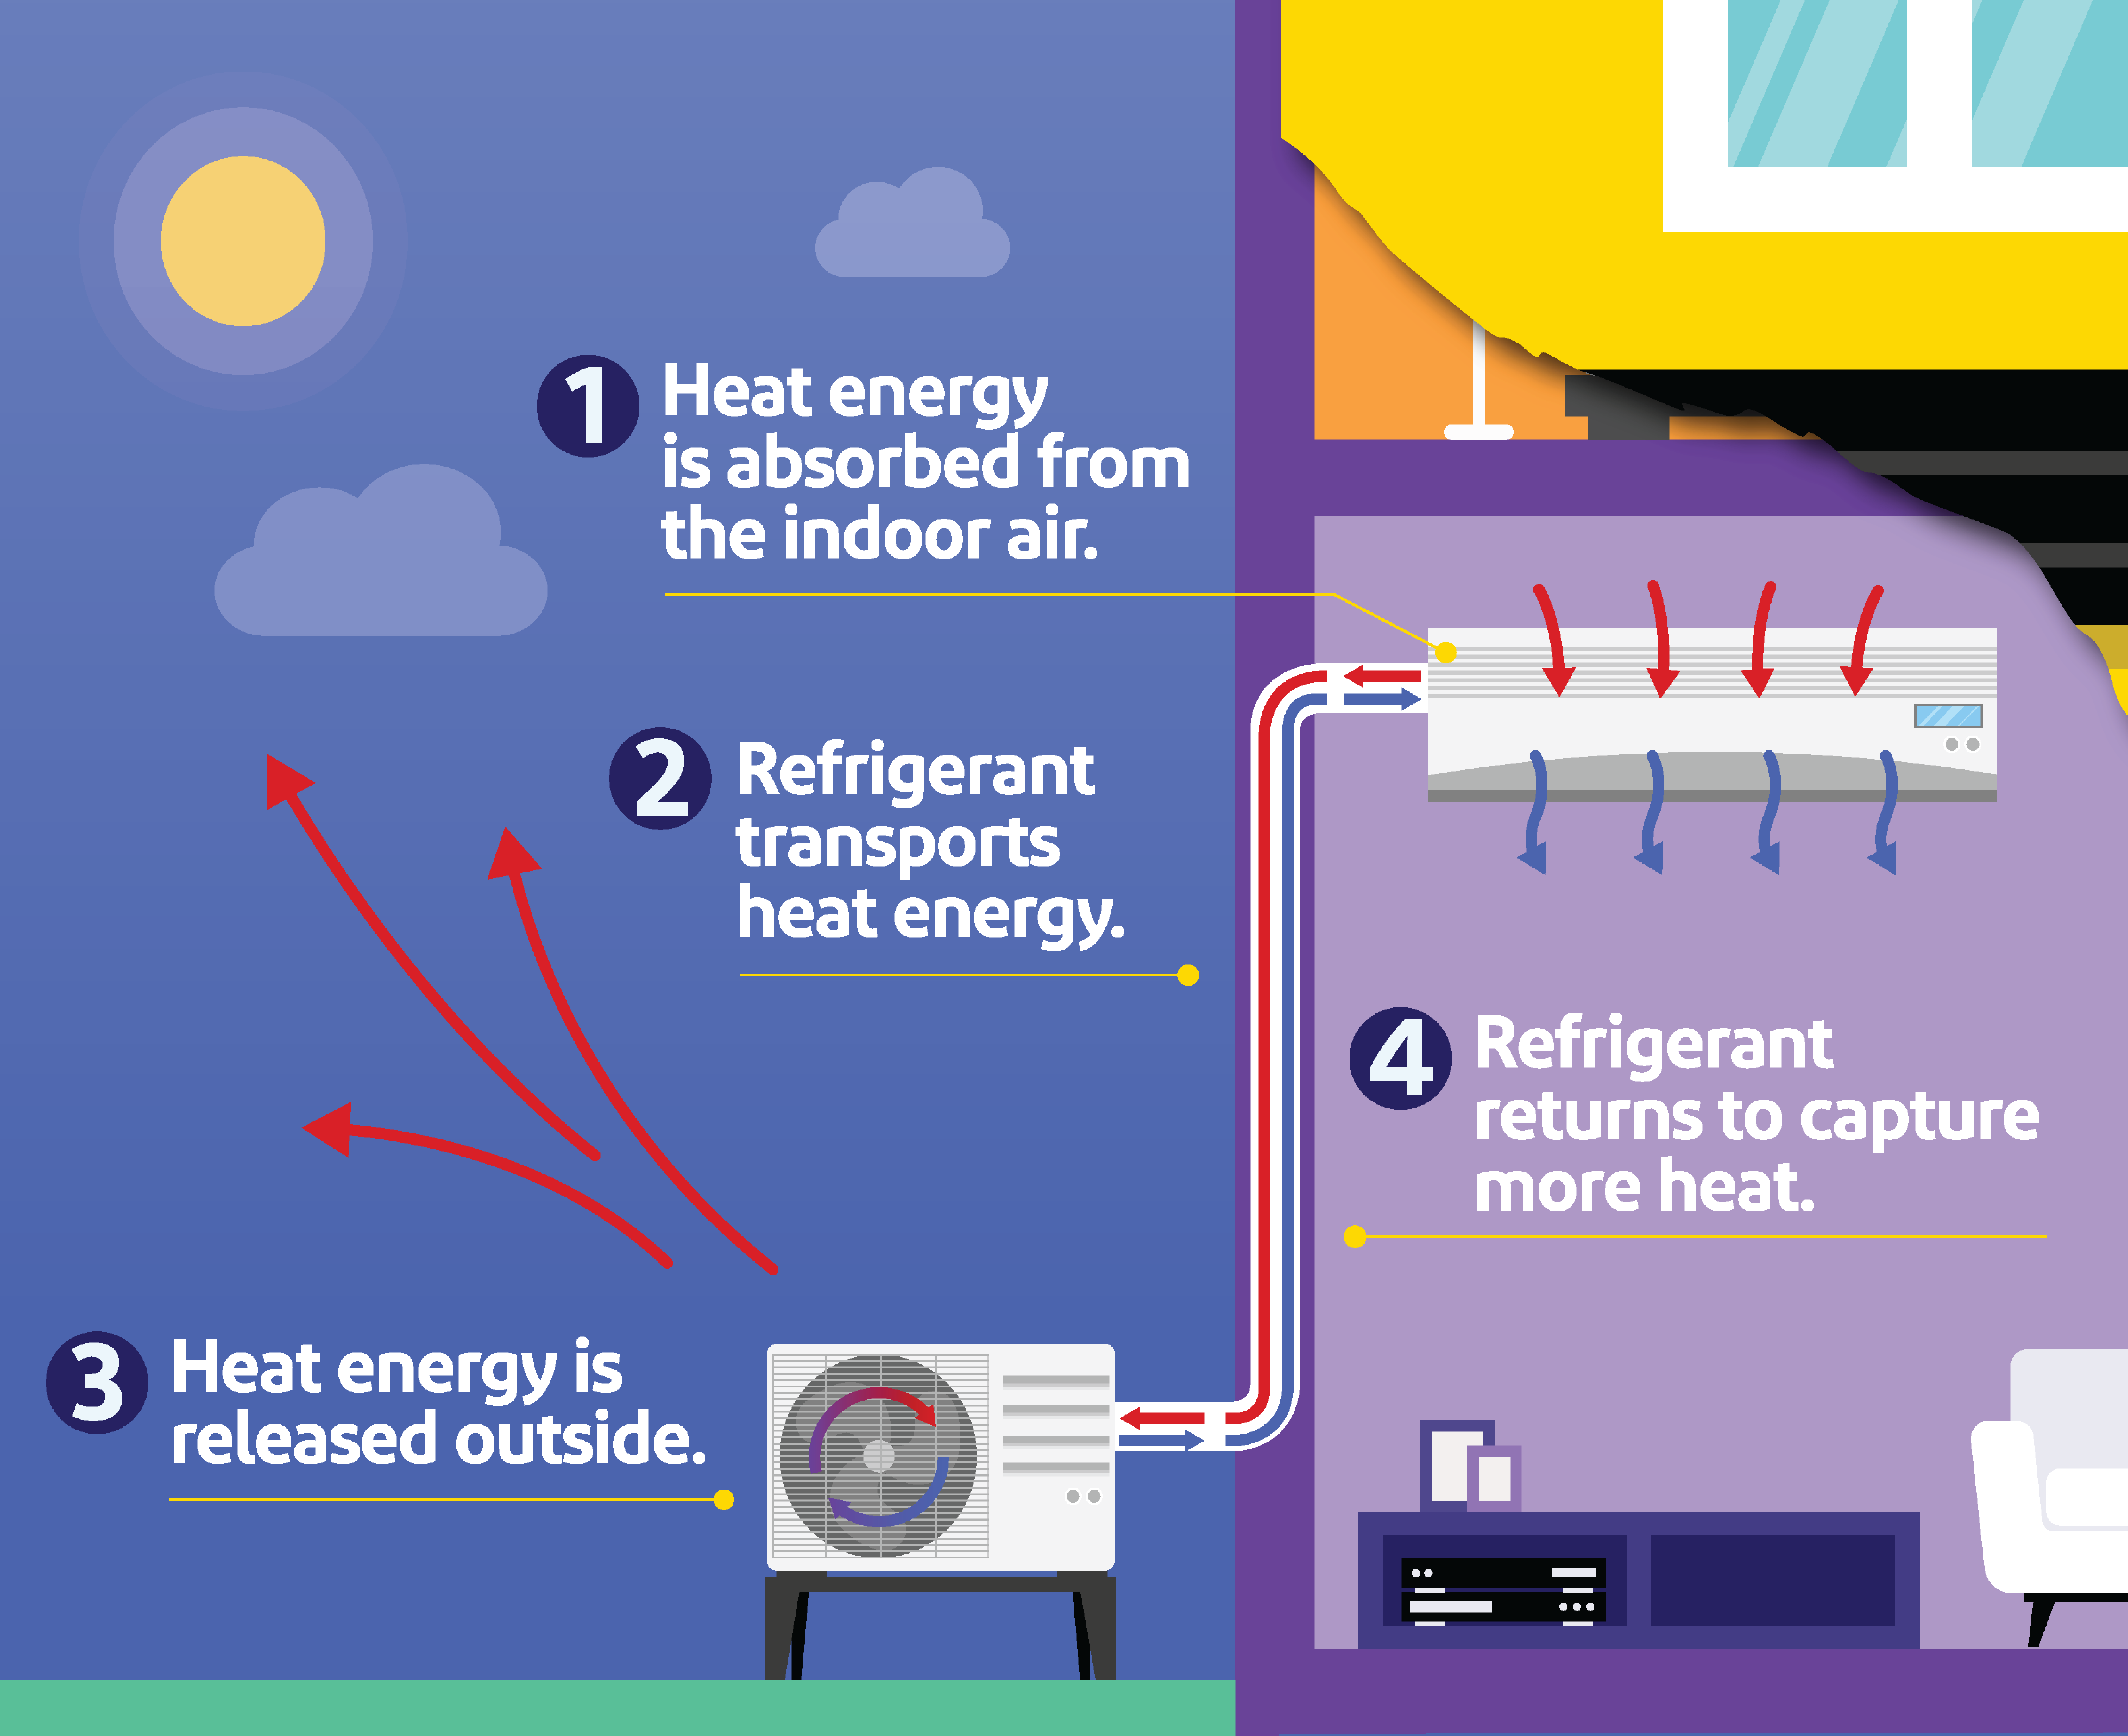 A graphic depicting how heat pumps work. In warm months, heat energy is absorbed from the indoor air through a heat pump indoor unit. Then, refrigerant transports the heat energy to the outside heat pump unit, where it is released. The refrigerant then returns inside to capture more heat.